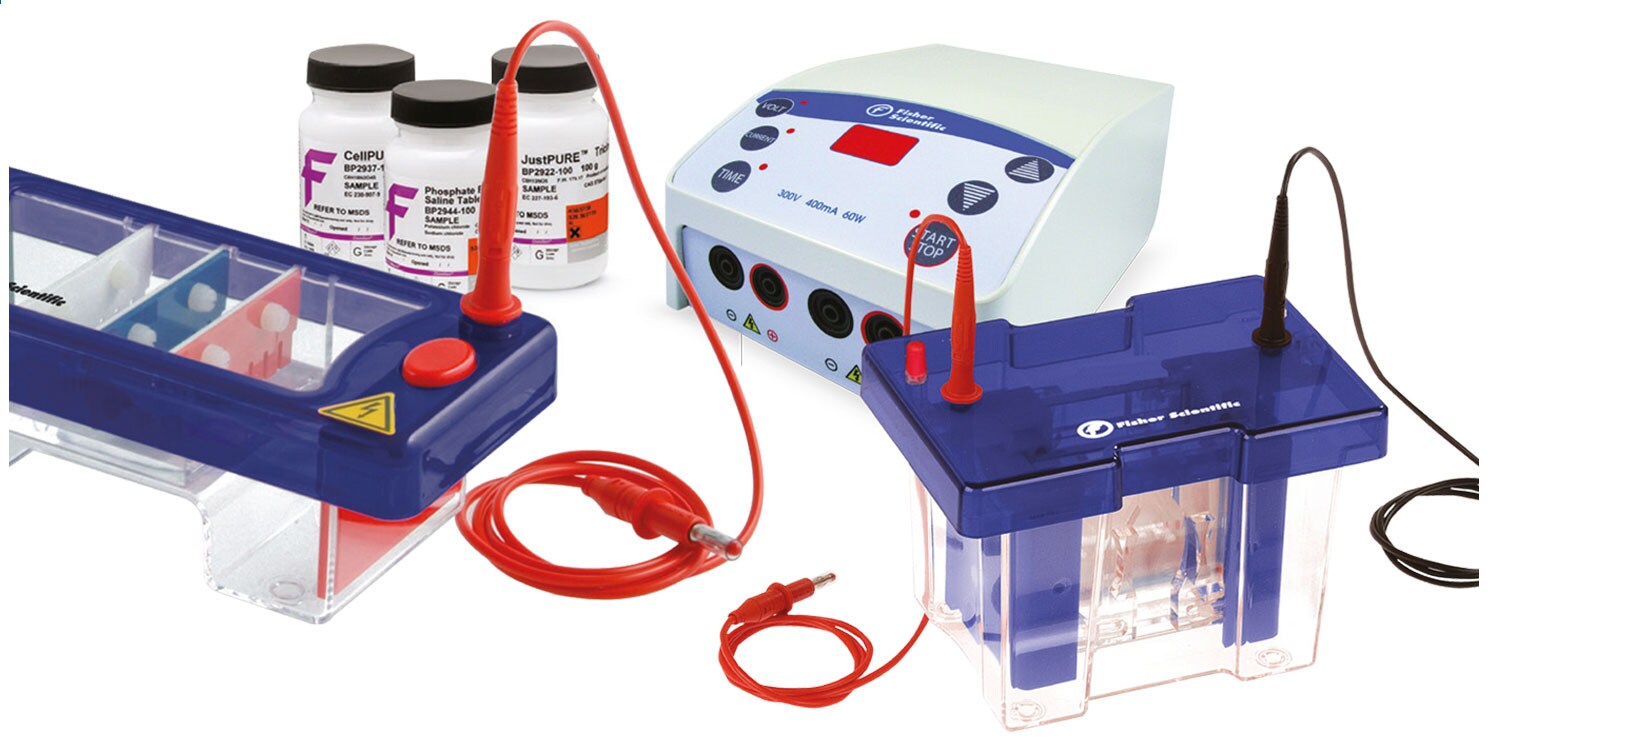 Fisherbrand Electrophoresis collection of equipment
